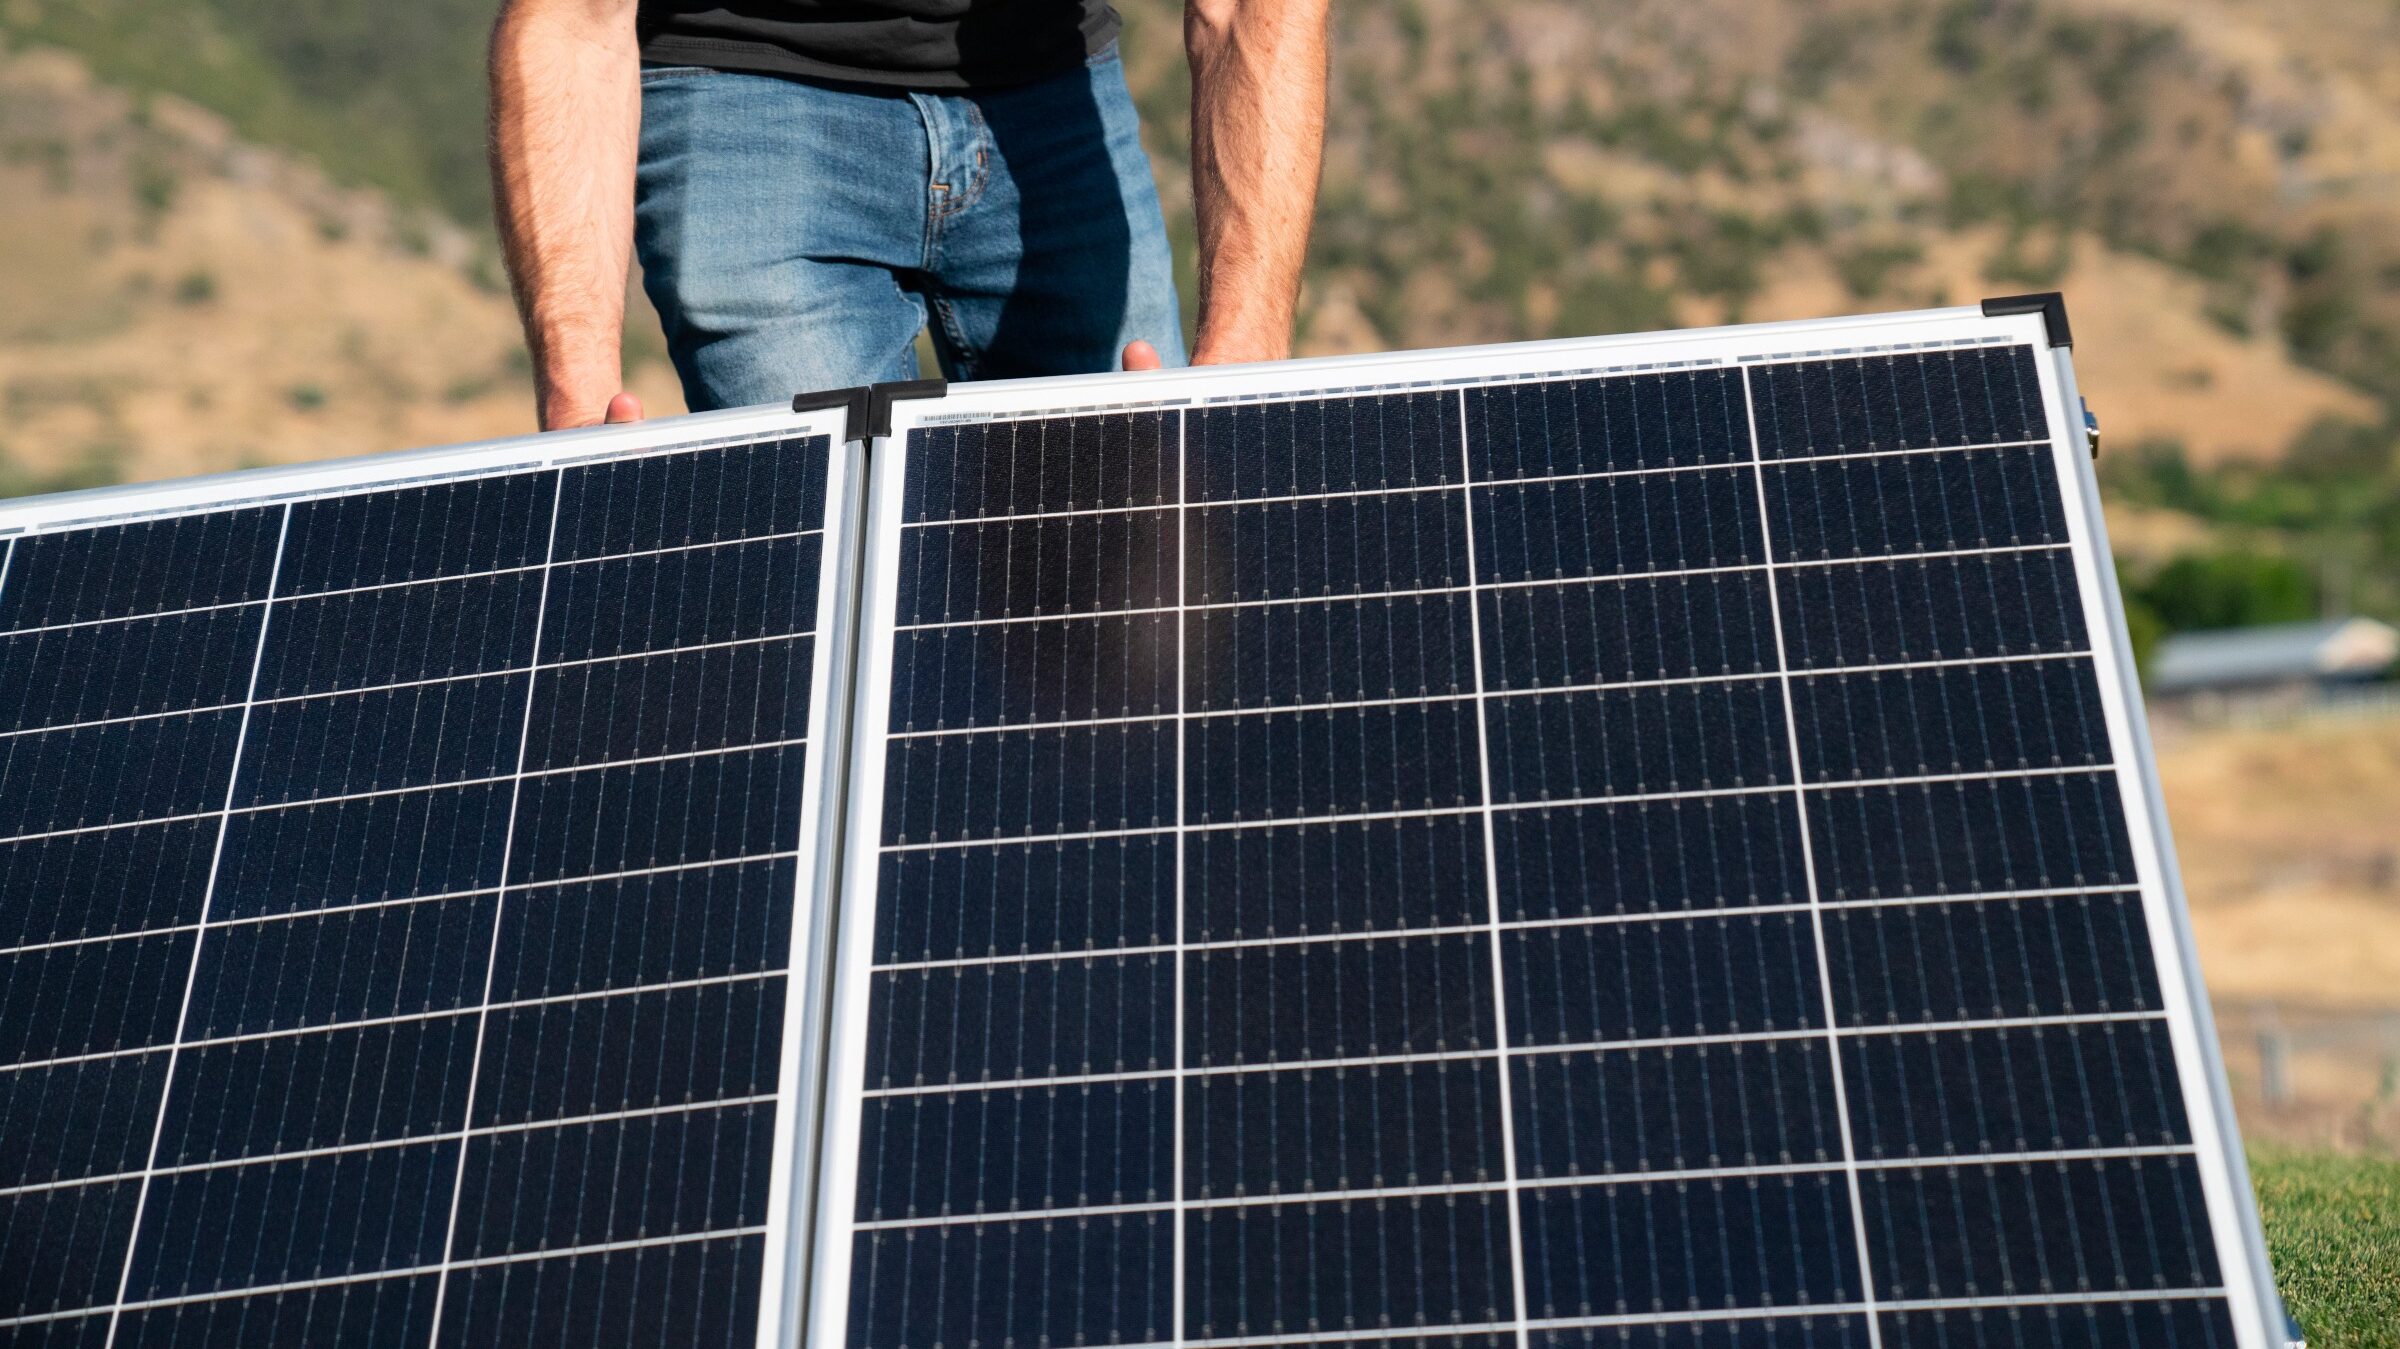 A man wearing a black shirt and blue jeans is setting up solar panels on a metal frame outside in the bright sunlight. 